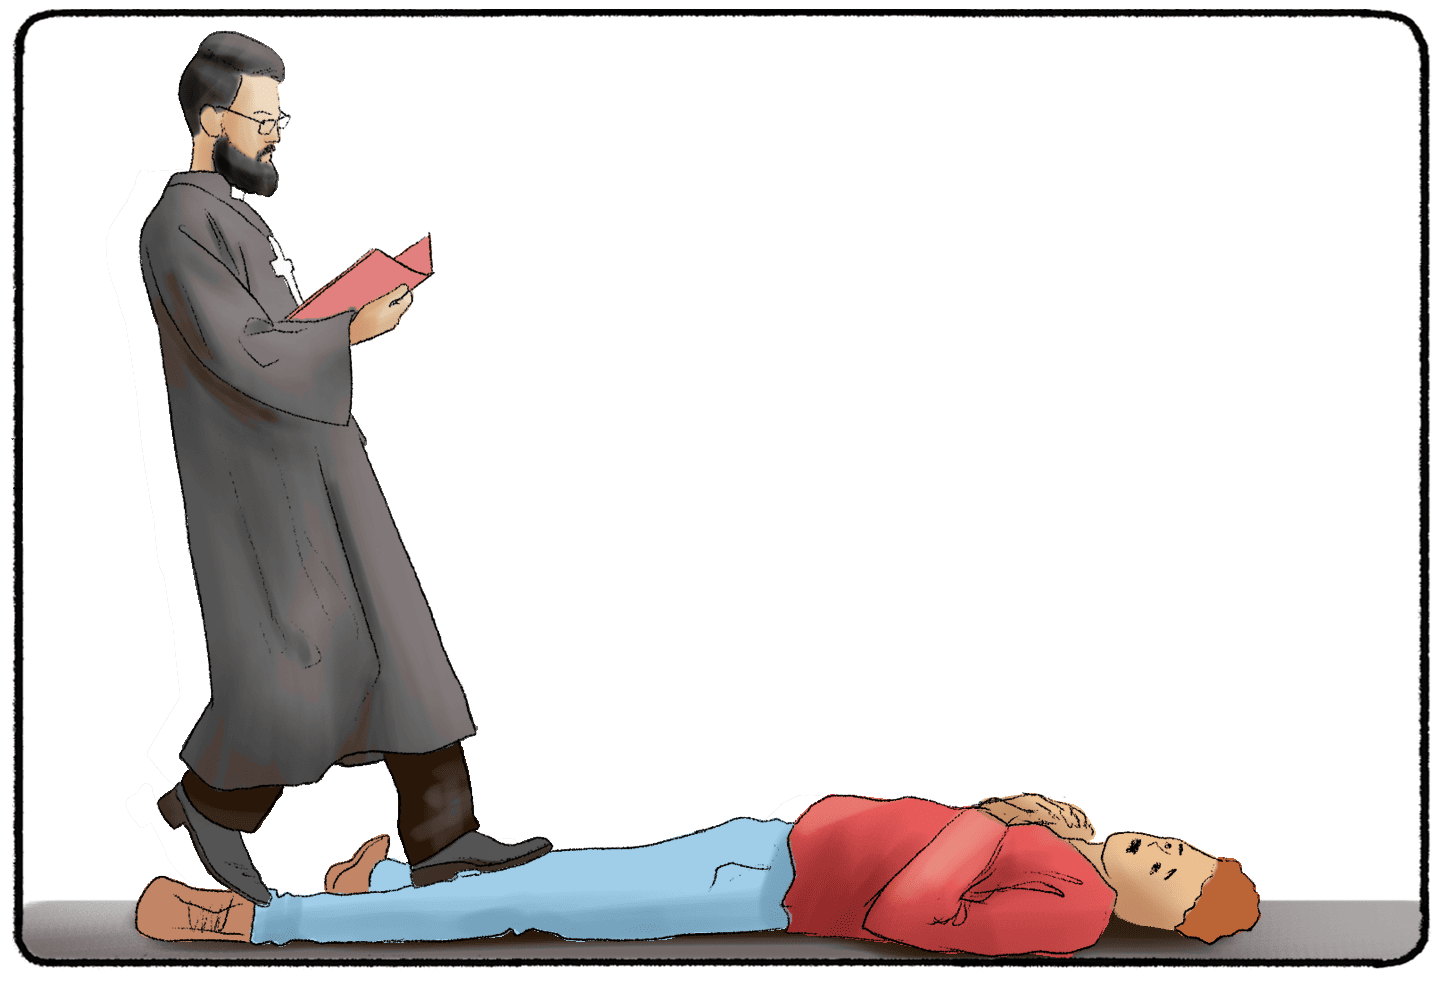 preist reading a book while walking past a man on the ground